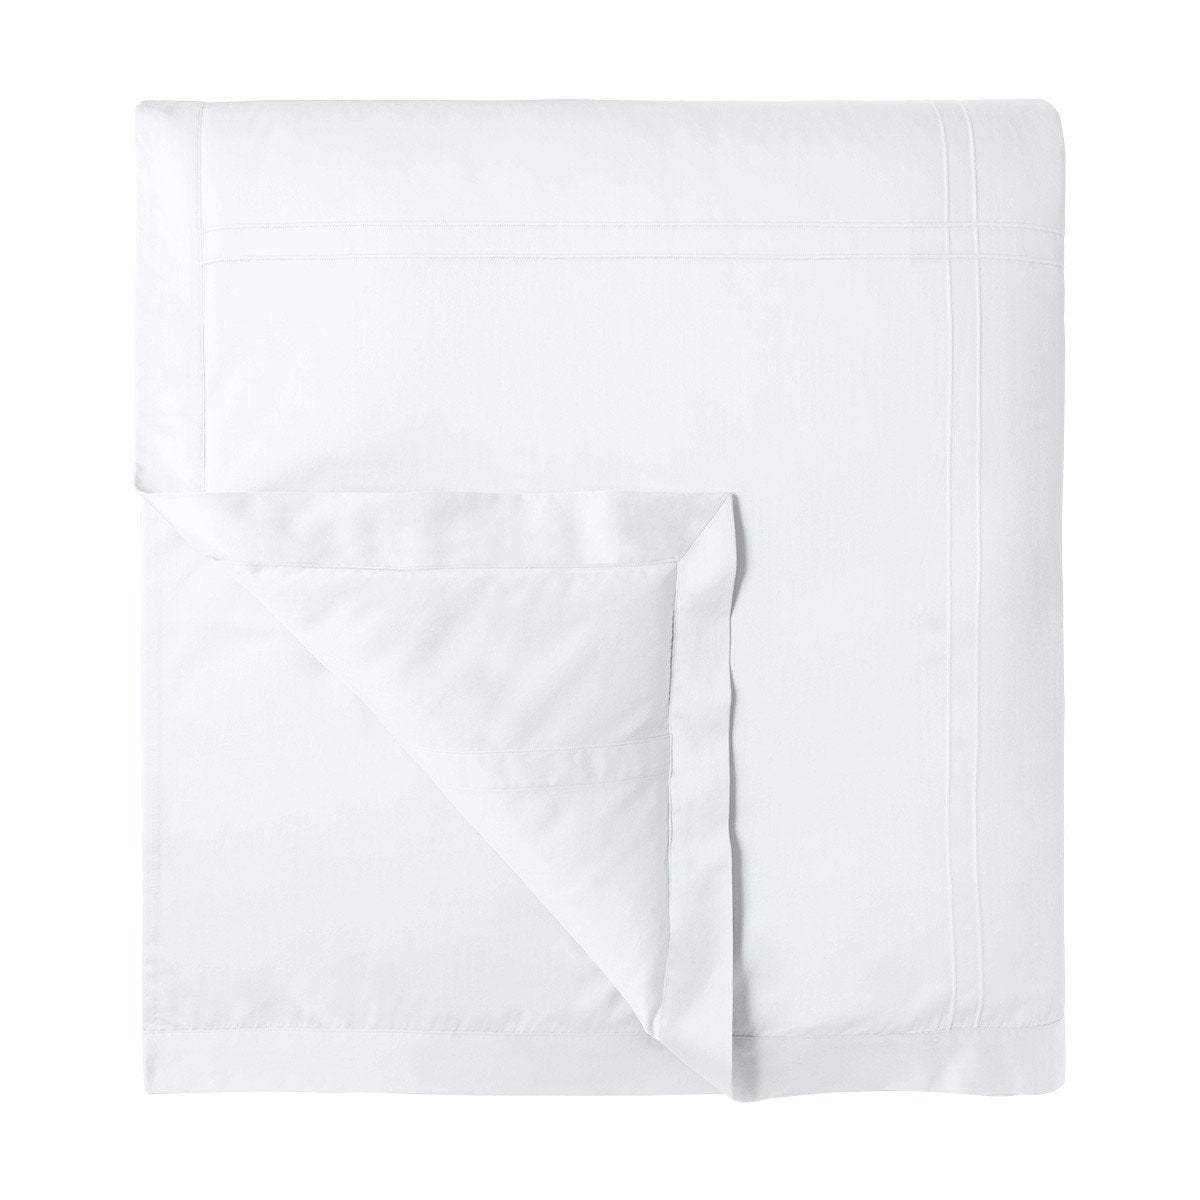 Adagio Blanc Bedding Collection by Yves Delorme | Fig Linens - White, cotton, luxury duvet cover